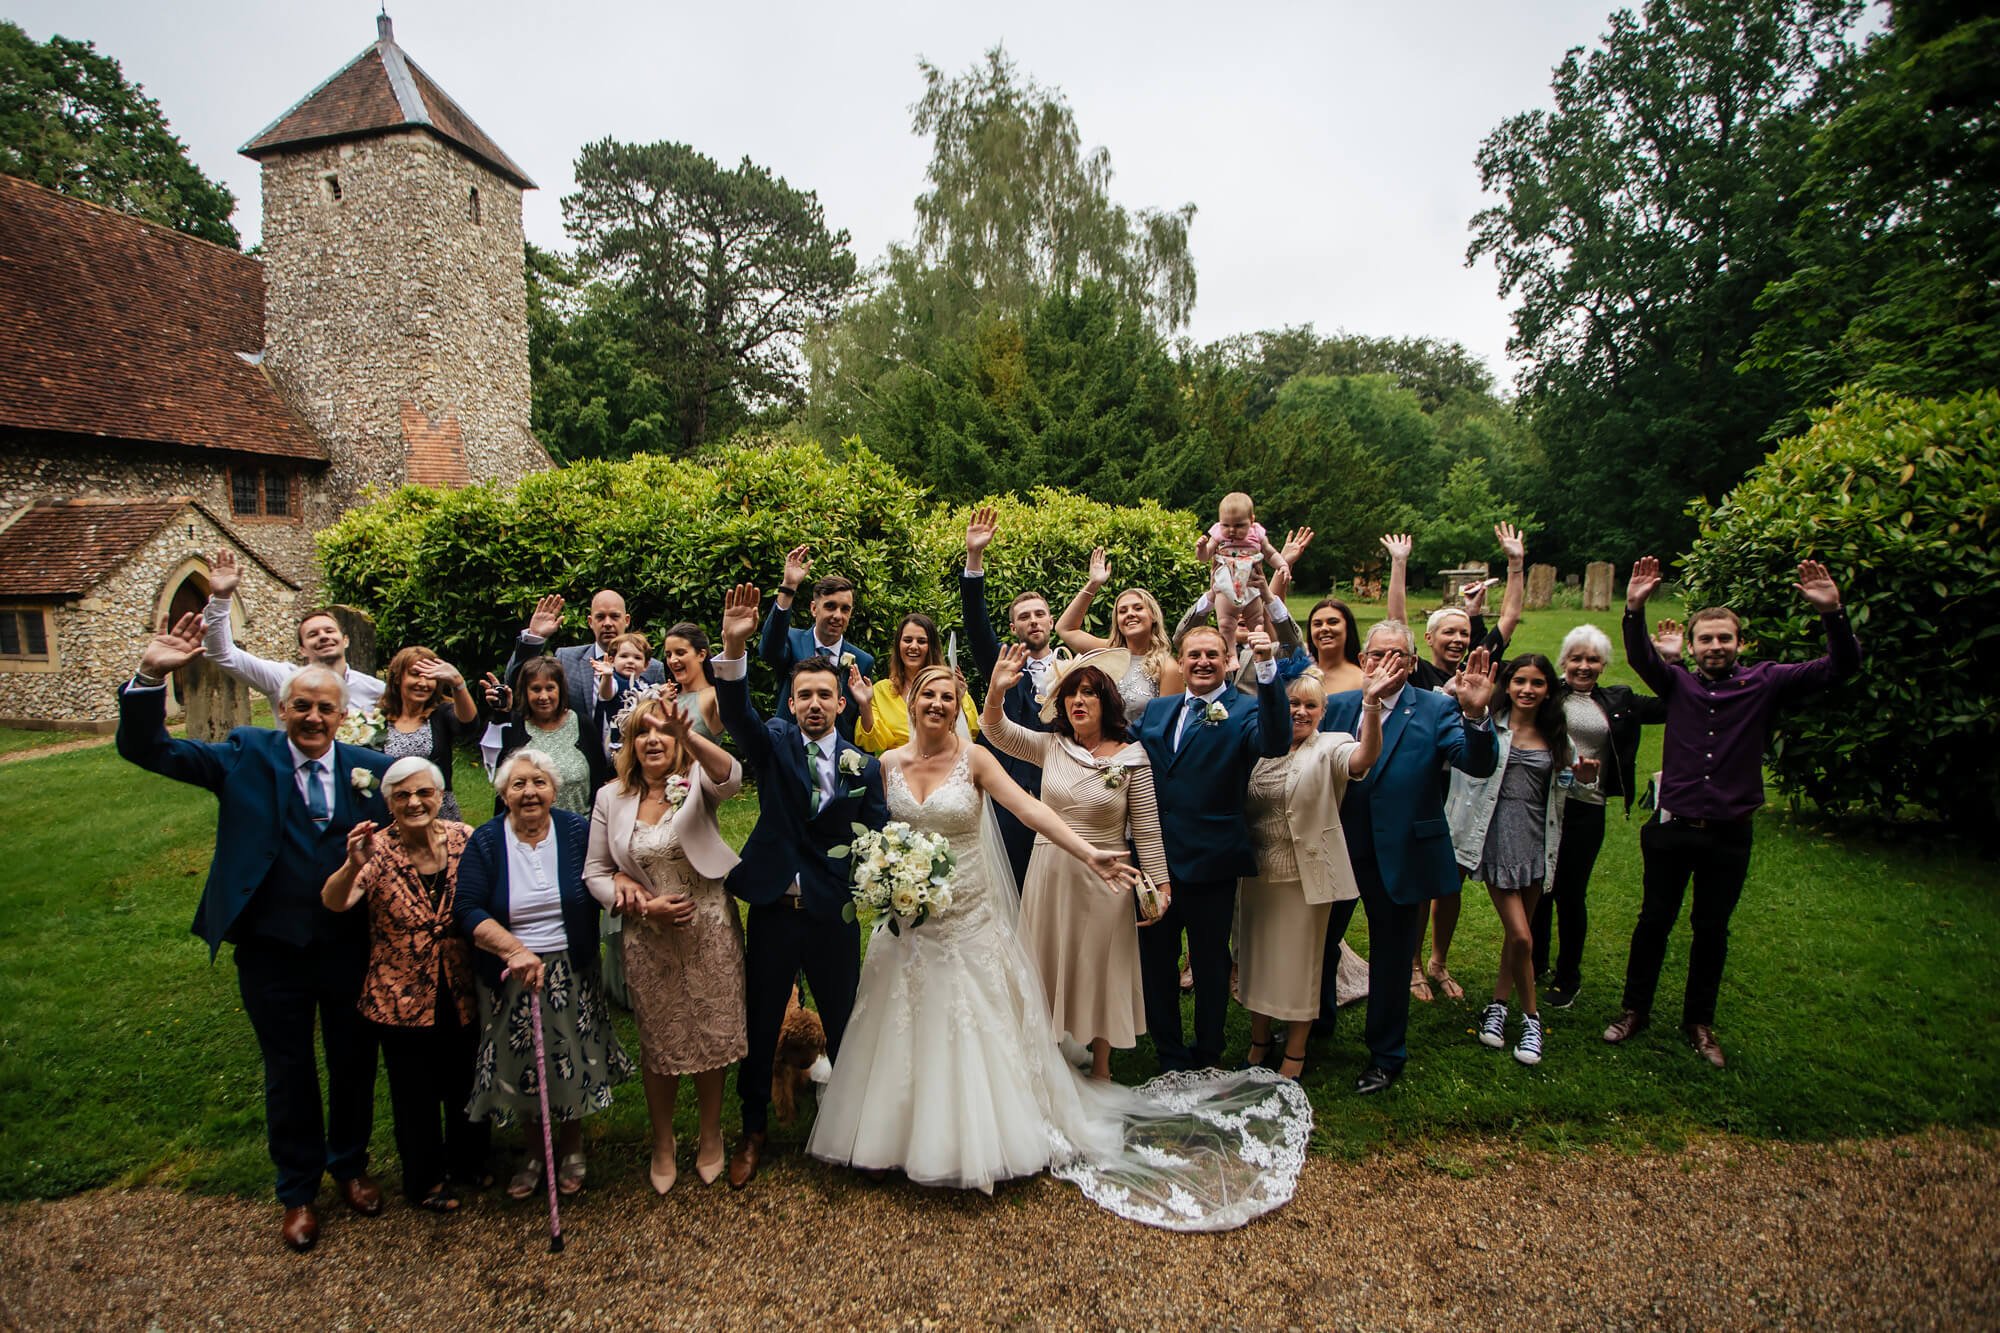 Group photo of the wedding guests at a church